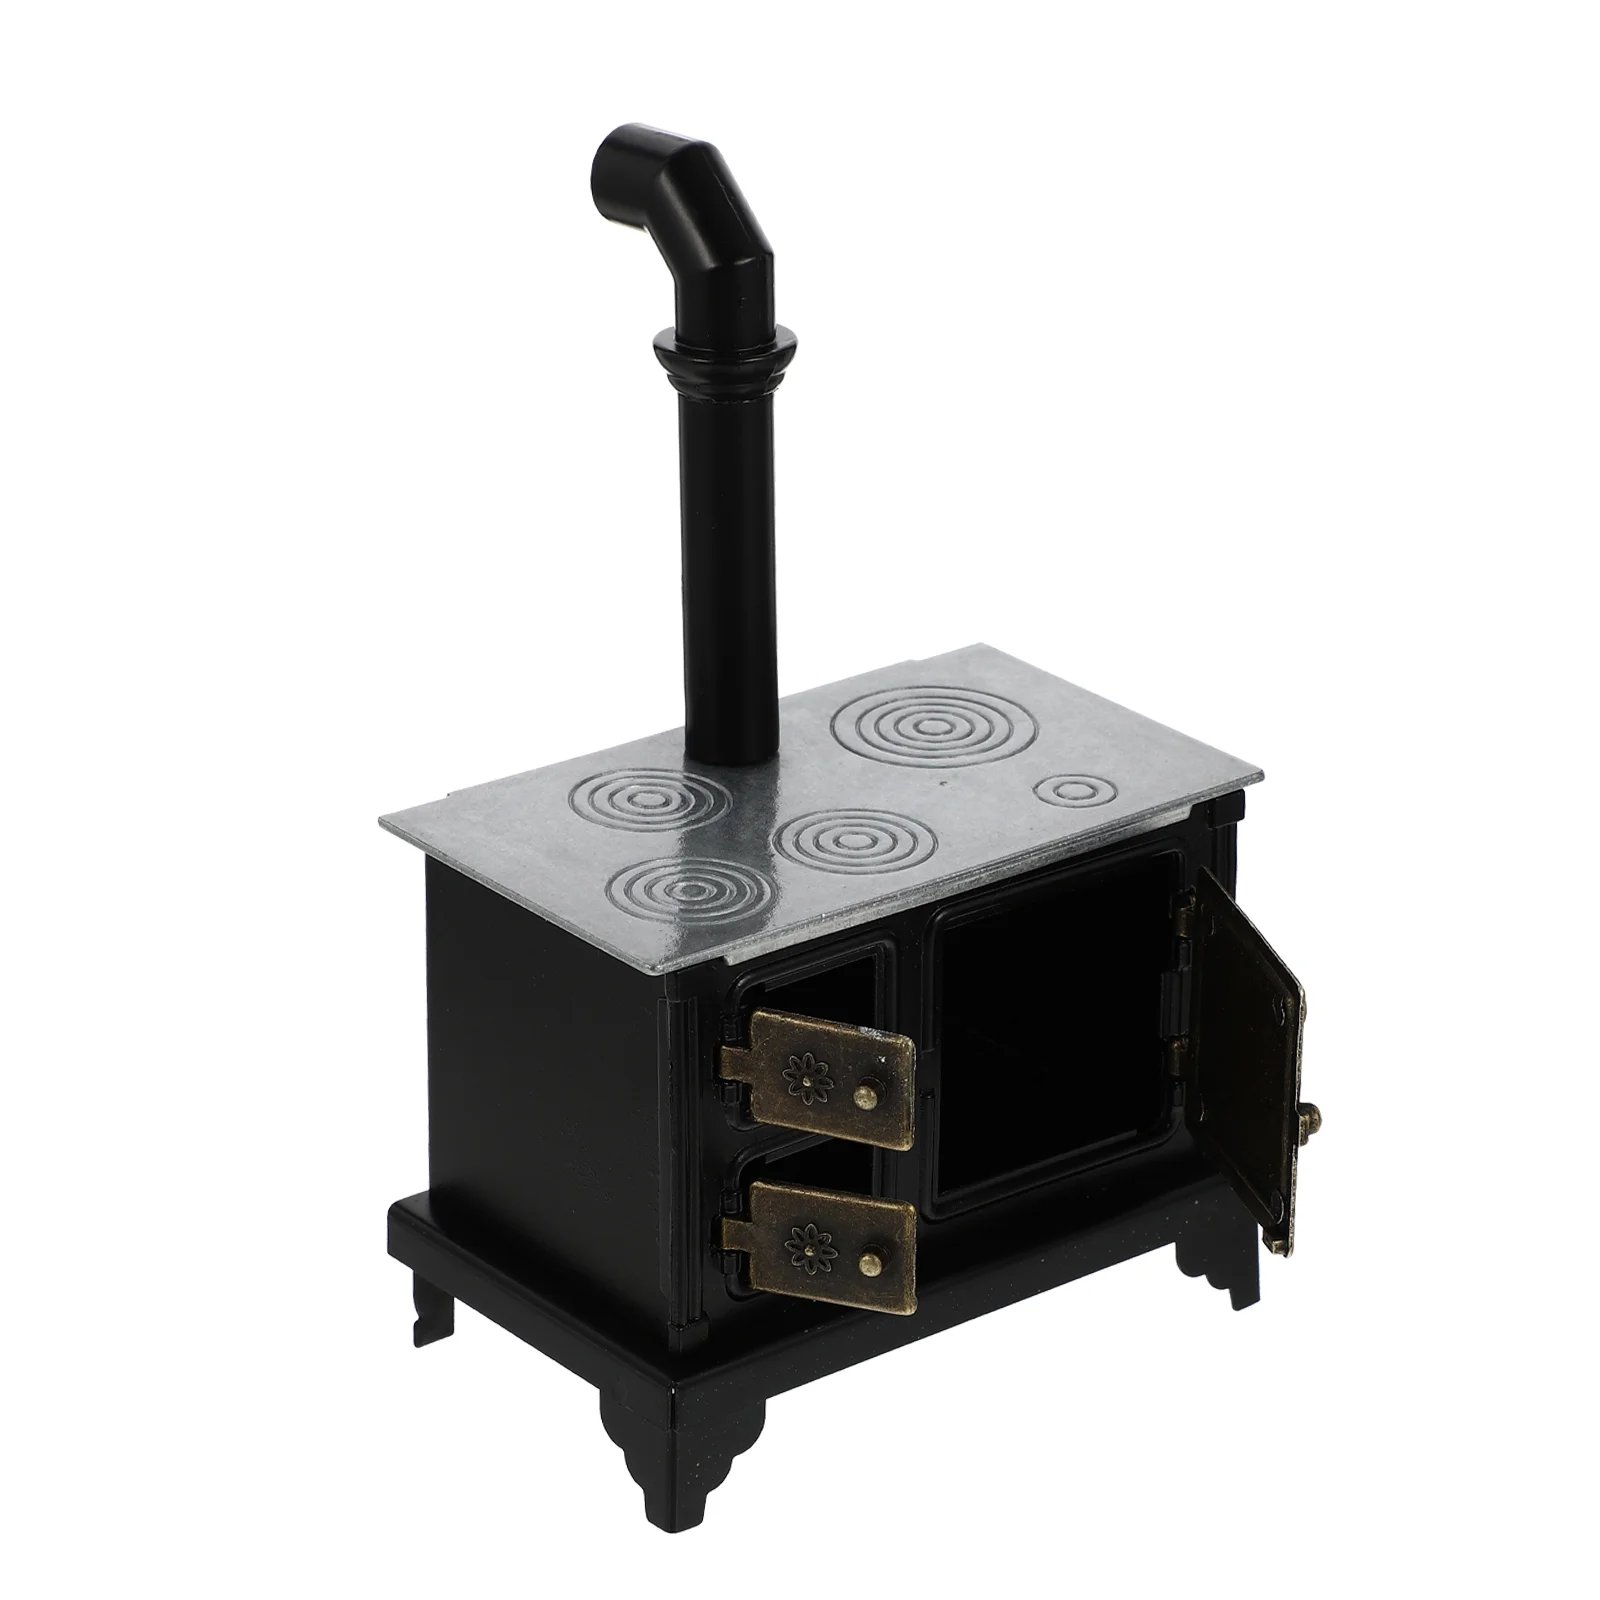 

Mini Iron Stove Cooking House Ornaments Miniature Bench Adorable Scene Layout Furniture Model